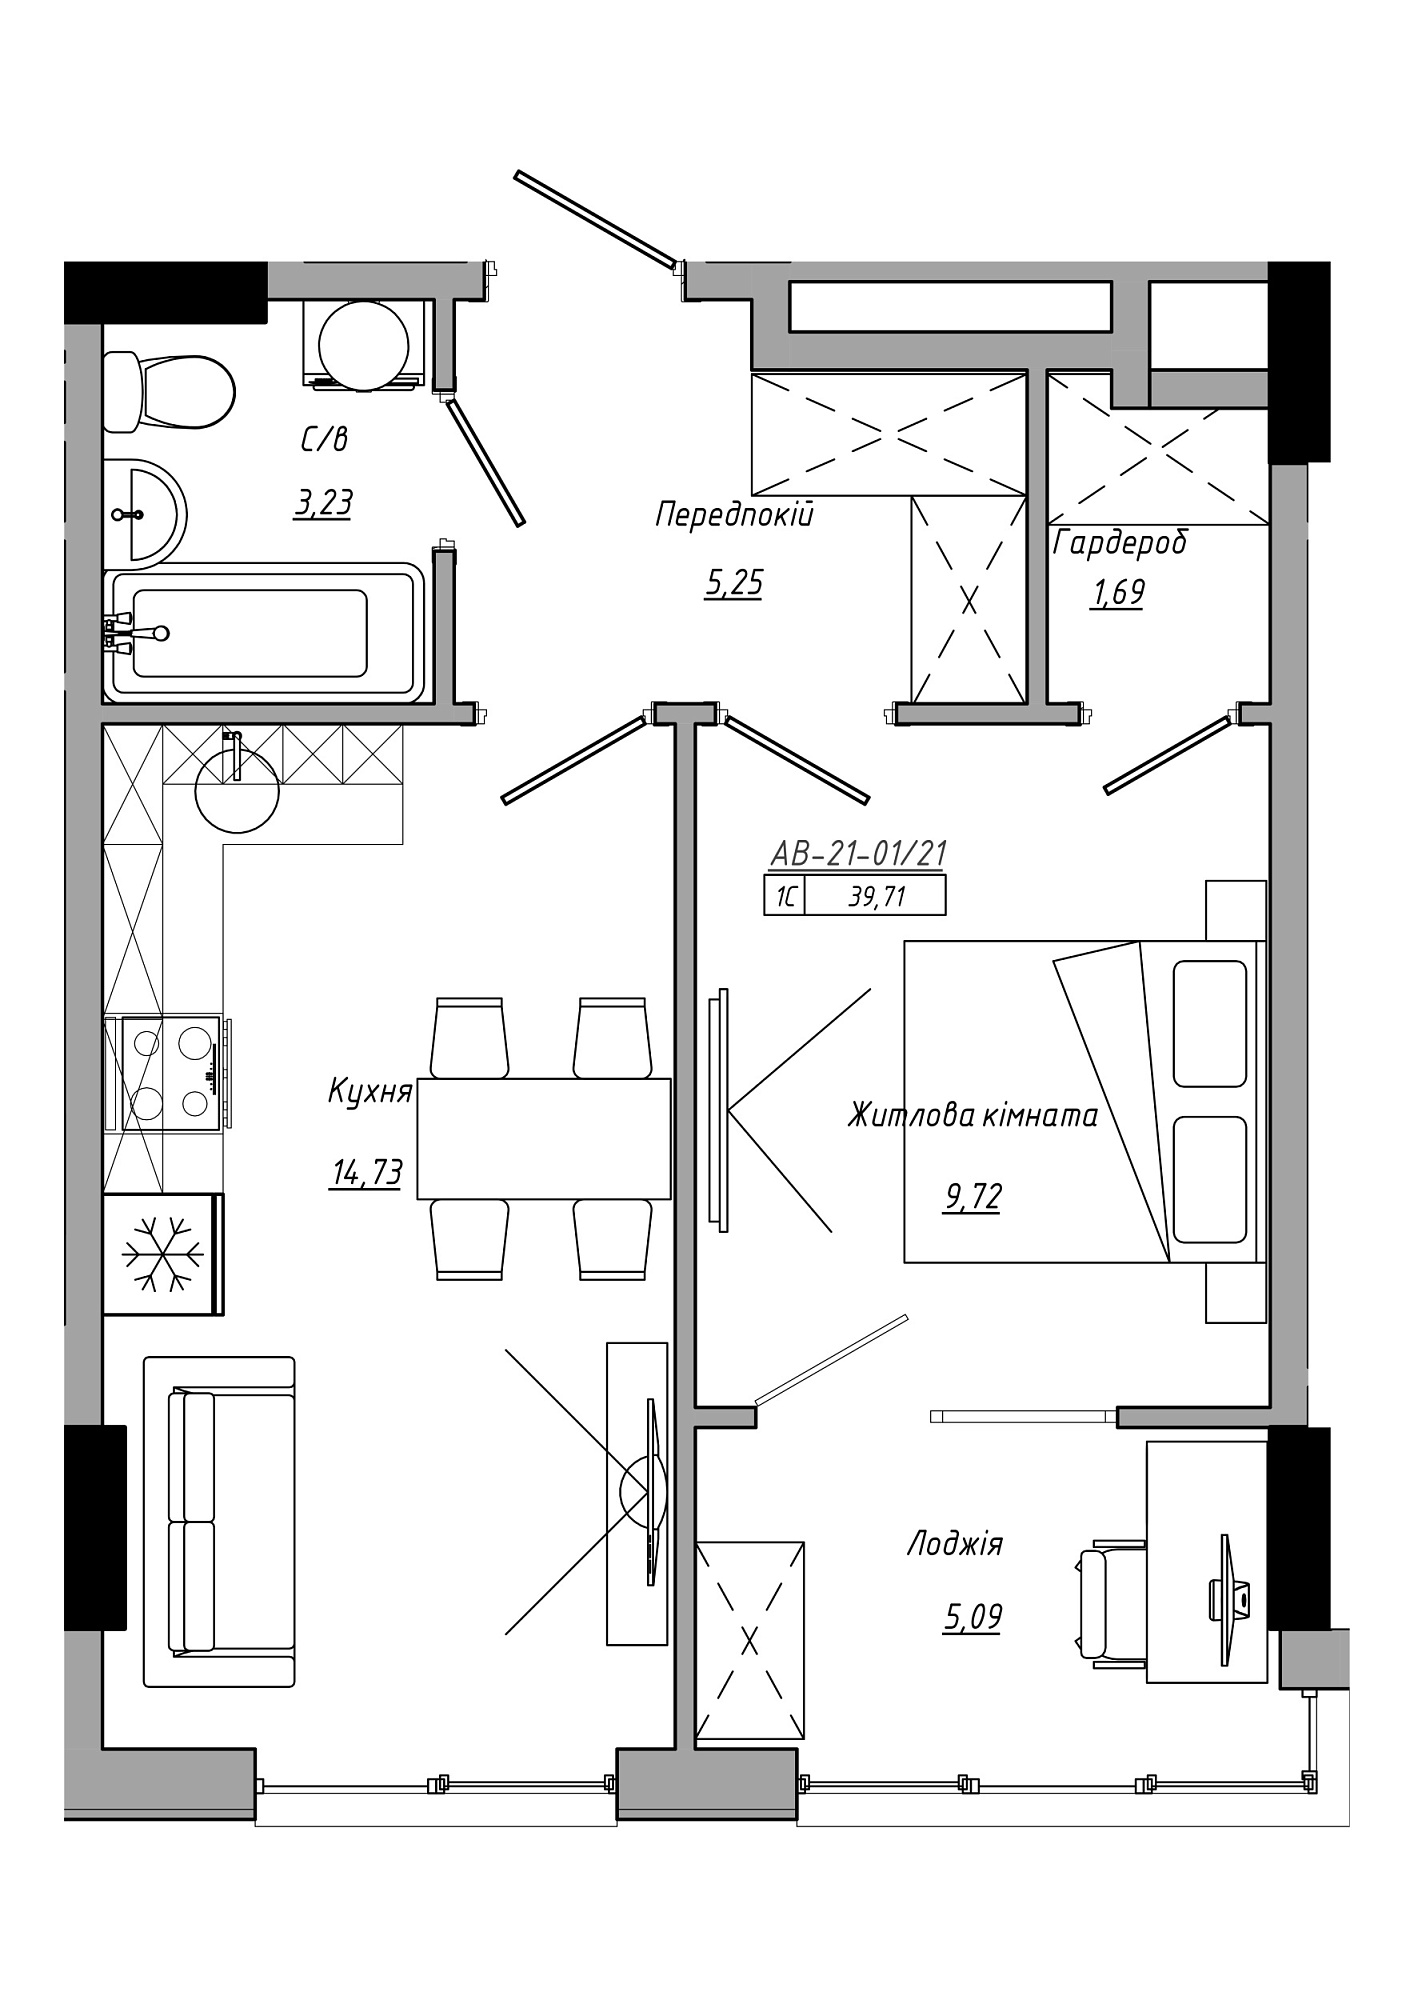 Planning 1-rm flats area 39.71m2, AB-21-01/00021.